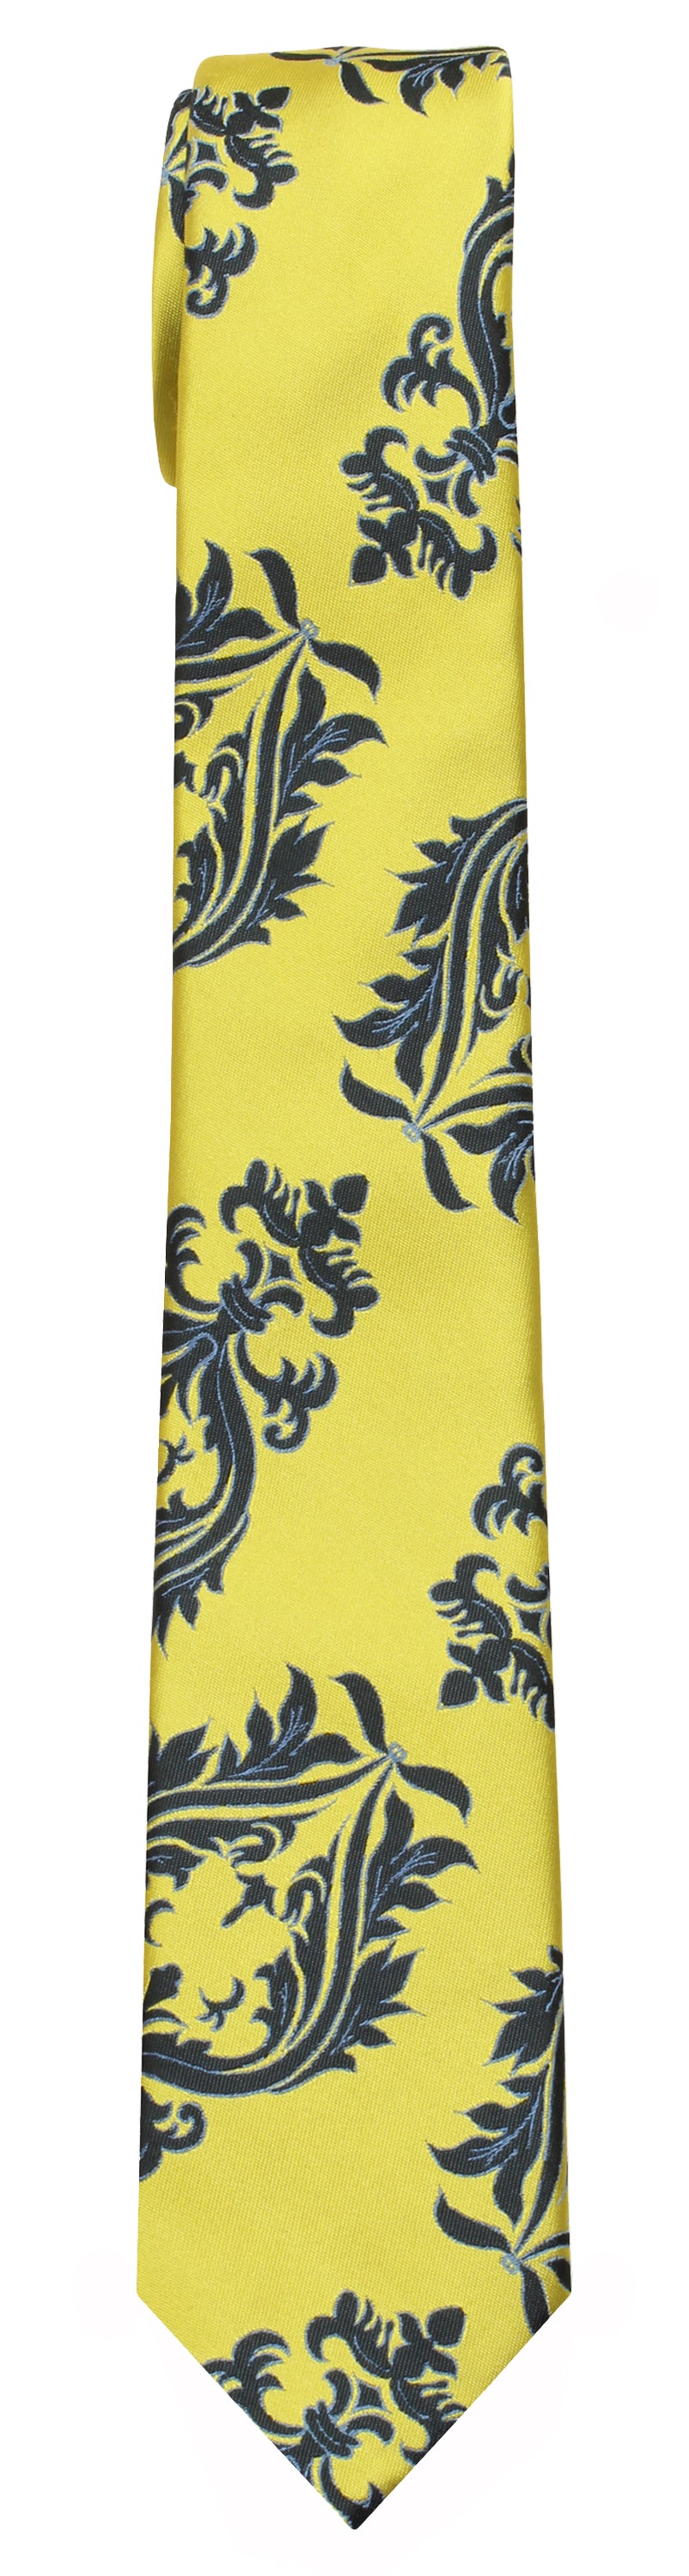 Mimi Fong Crest Tie in Yellow